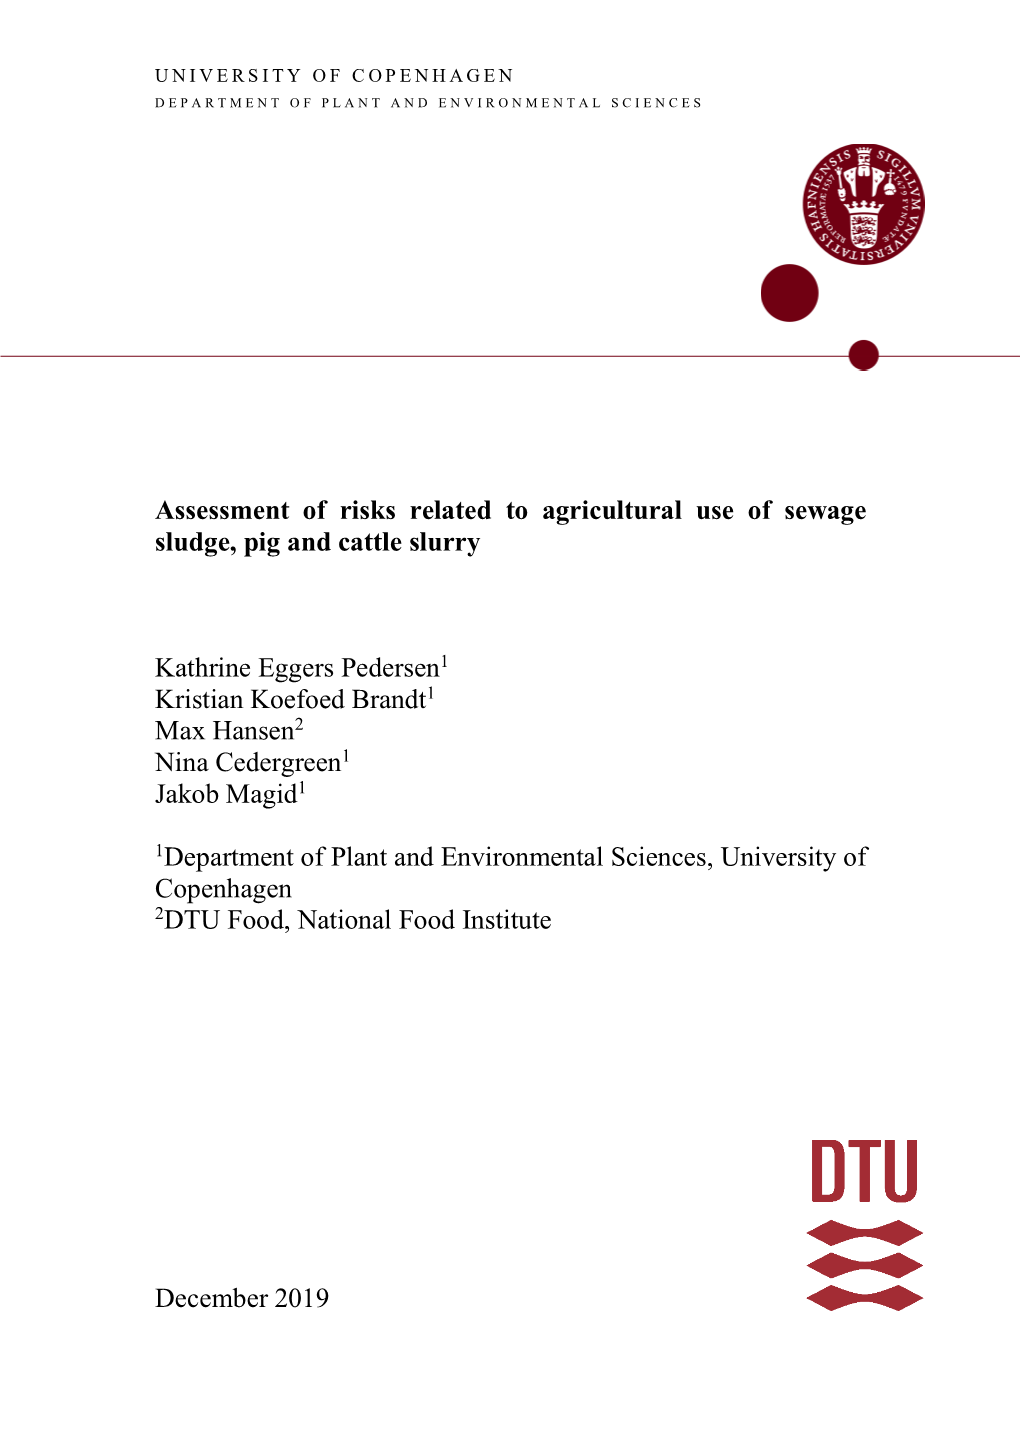 Assessment of Risks Related to Agricultural Use of Sewage Sludge, Pig and Cattle Slurry